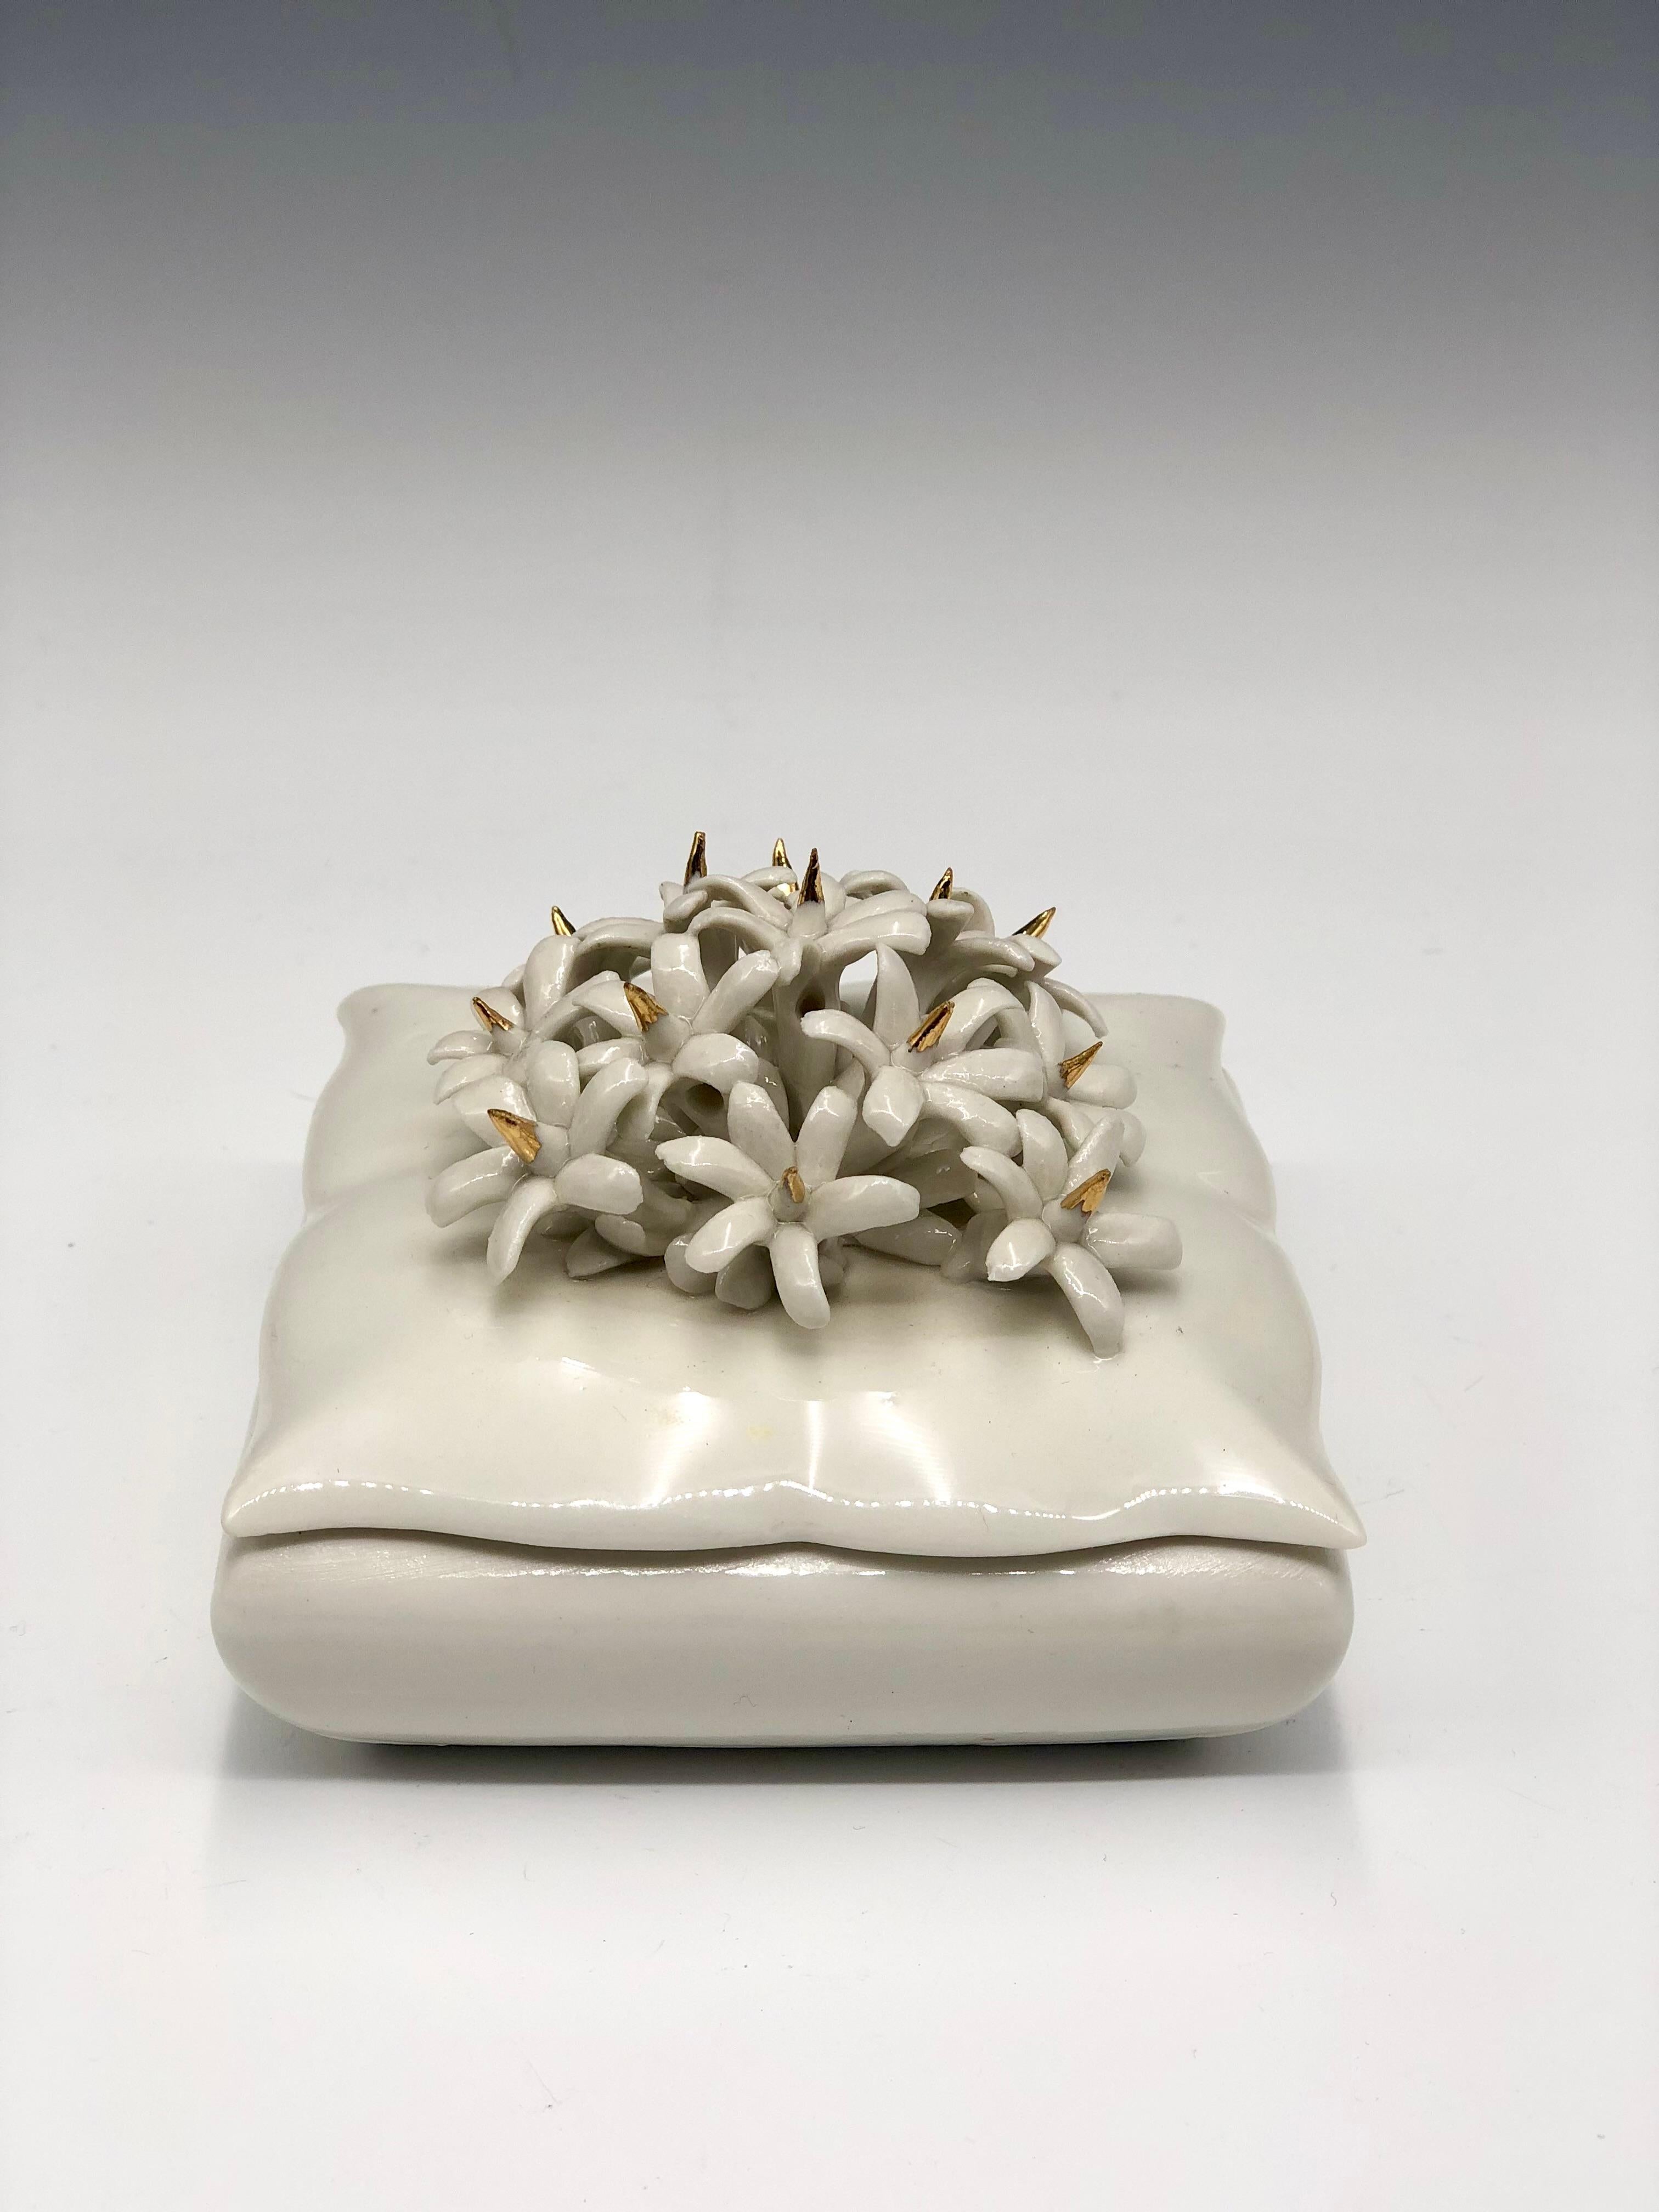 Exquisite vintage white Capodimonte square porcelain trinket box with floral detail lid. Simple and elegant, the box lid is adorned with sculpted white flowers with painted 24k Gold spike details. The item has a blue-crowned 